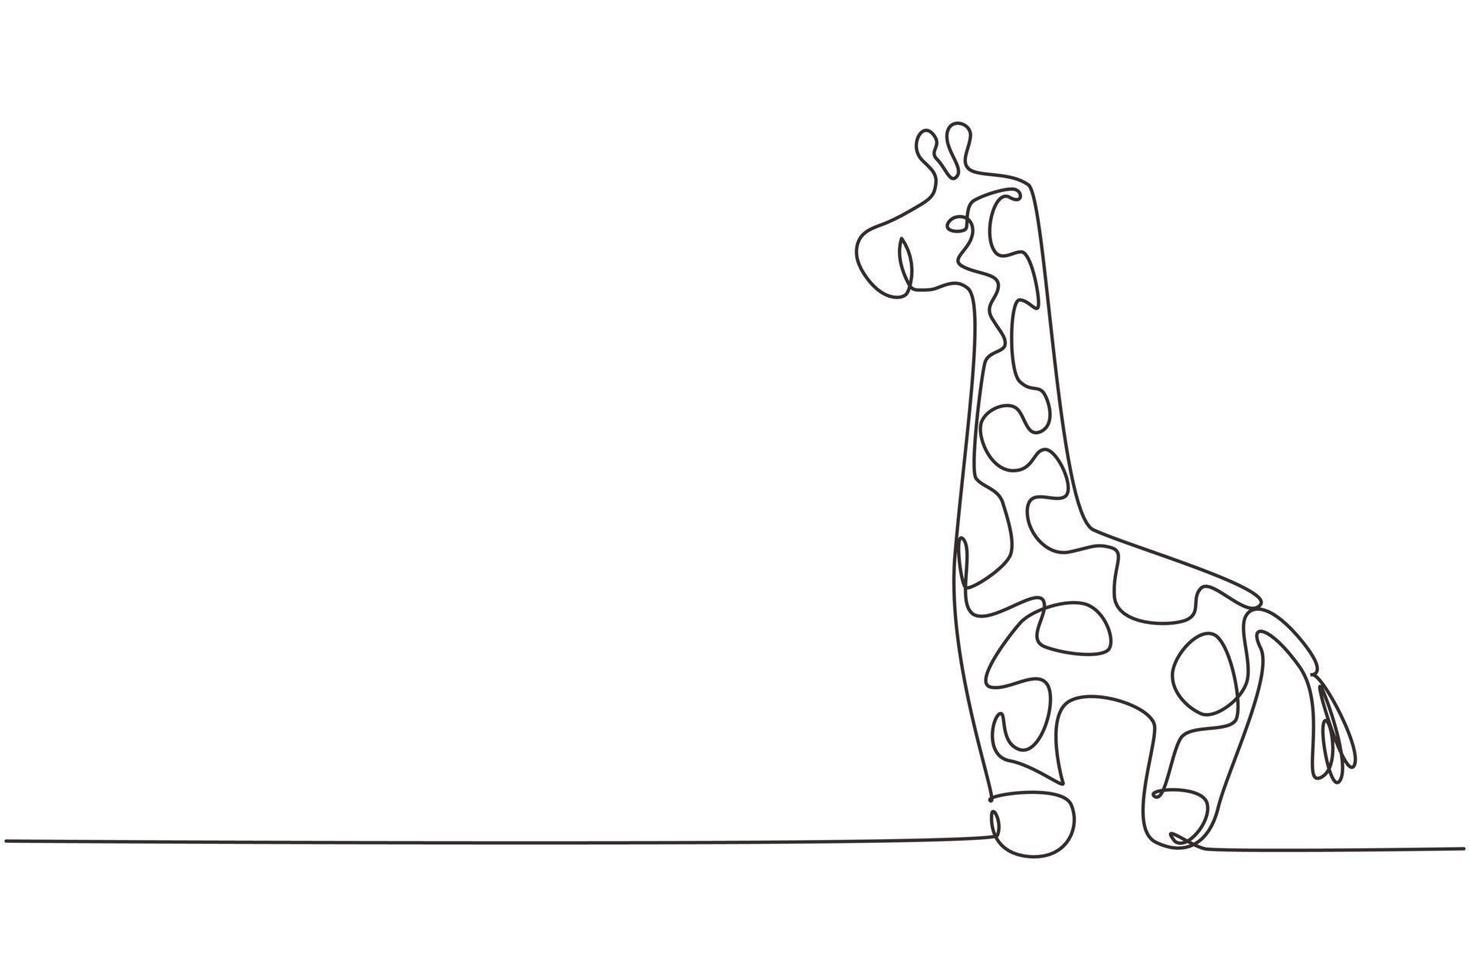 Single continuous line drawing cute giraffe plush doll. Giraffe plush stuffed puppet. Stuffed giraffe toy. Yellow giraffe toys for children. Dynamic one line draw graphic design vector illustration